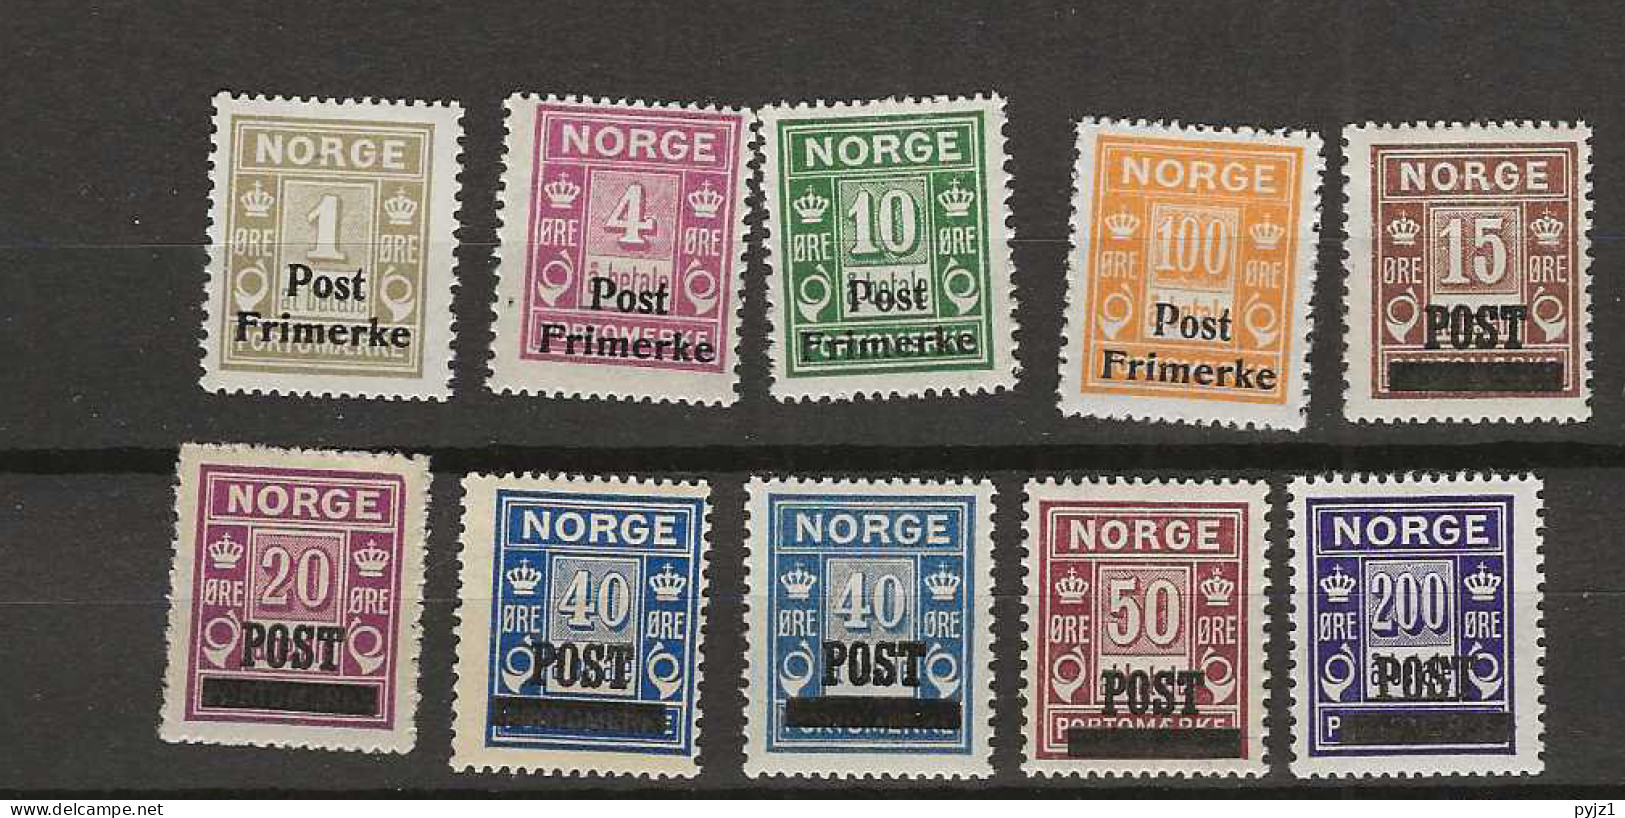 1929 MNH Norway Mi 141-149 (20 Ore Is MH/*) Including Both Shades Of 40 Ore - Unused Stamps